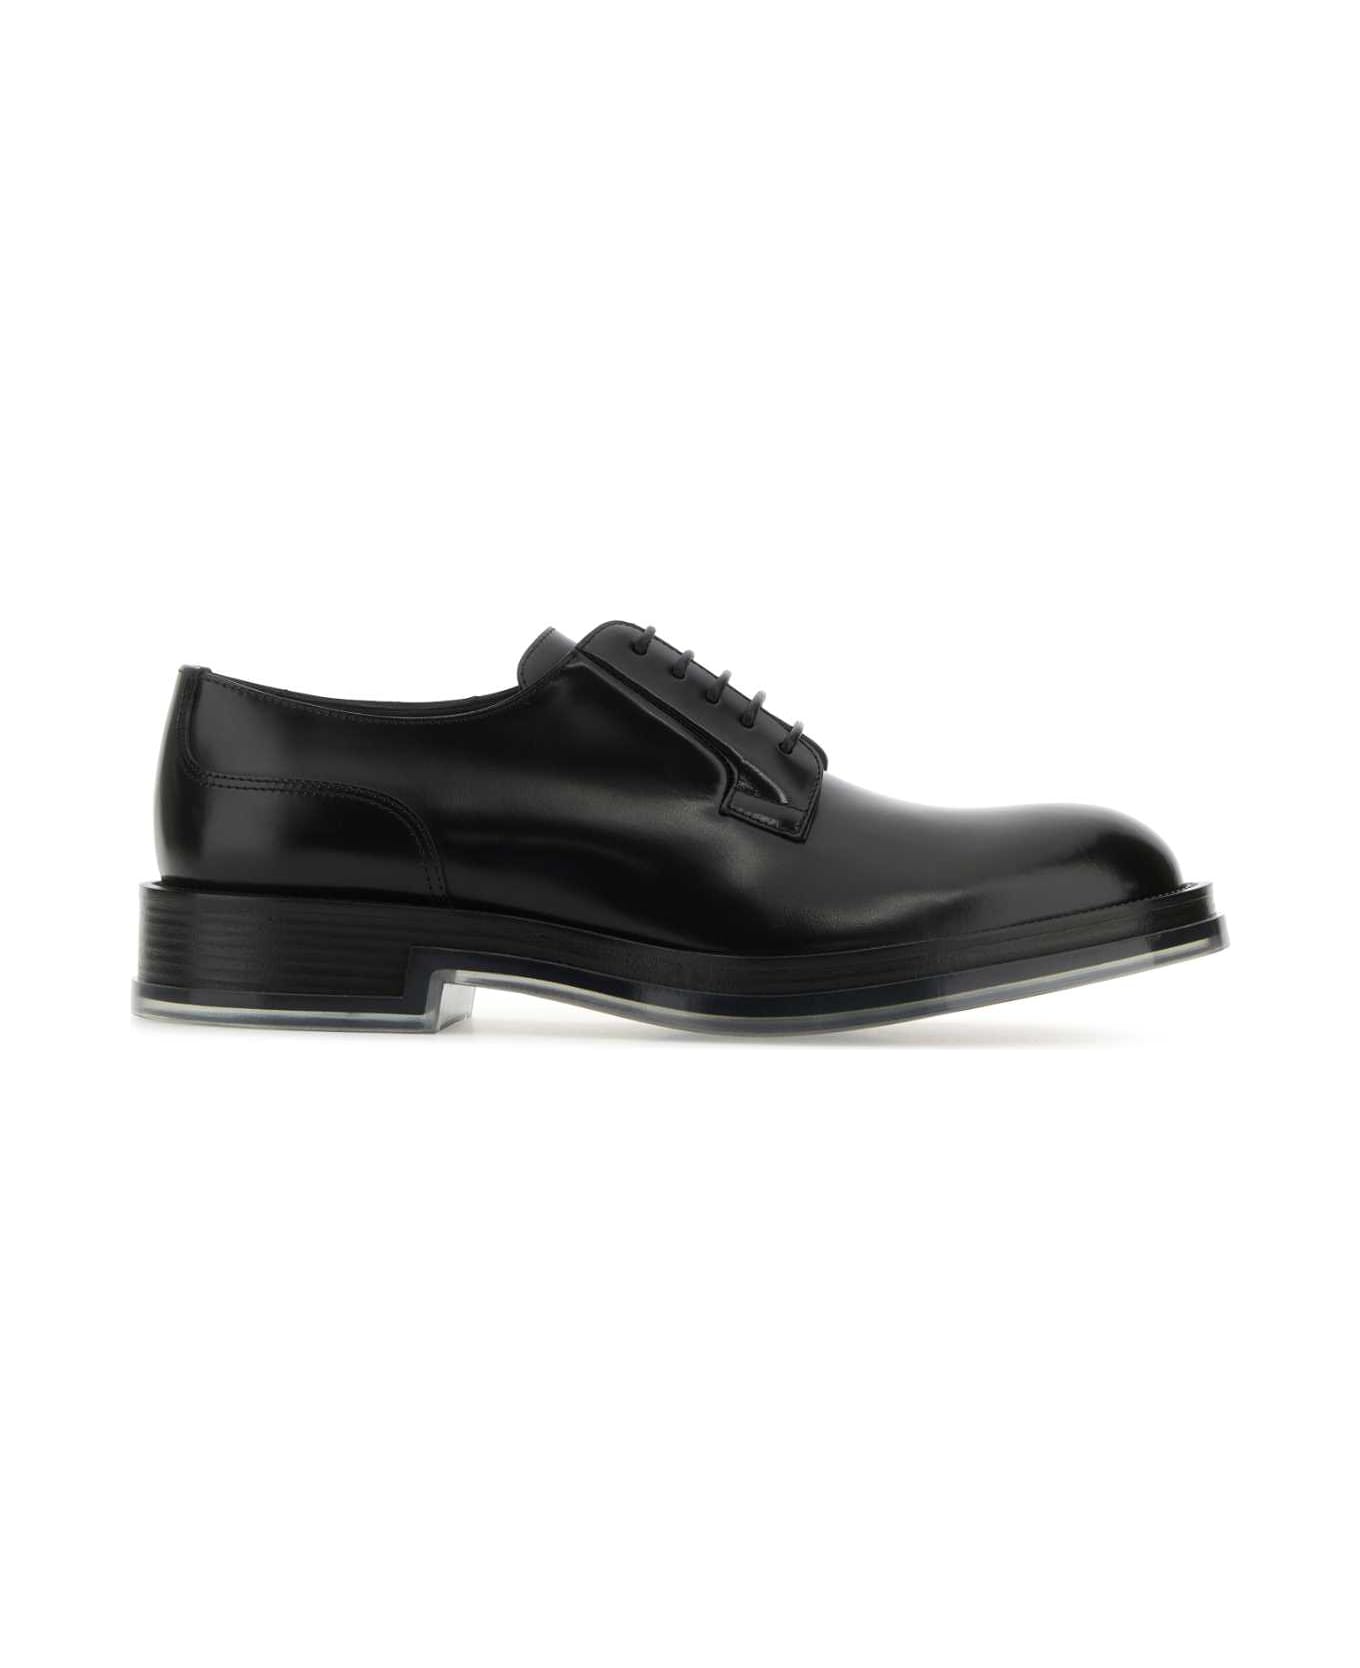 Alexander McQueen Black Leather Float Lace-up Shoes - BLACKTRANSPARENT ローファー＆デッキシューズ